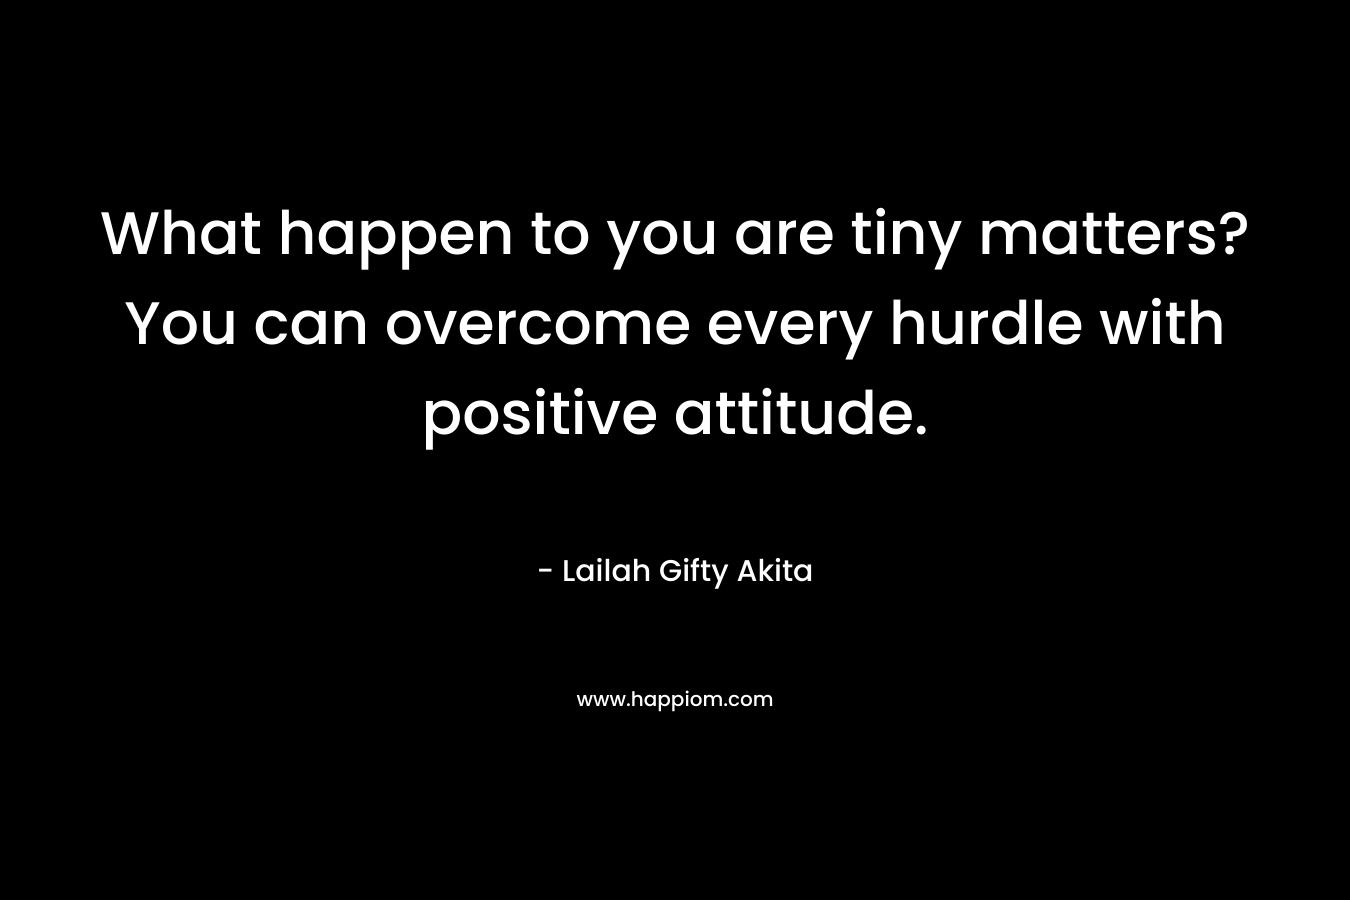 What happen to you are tiny matters? You can overcome every hurdle with positive attitude.